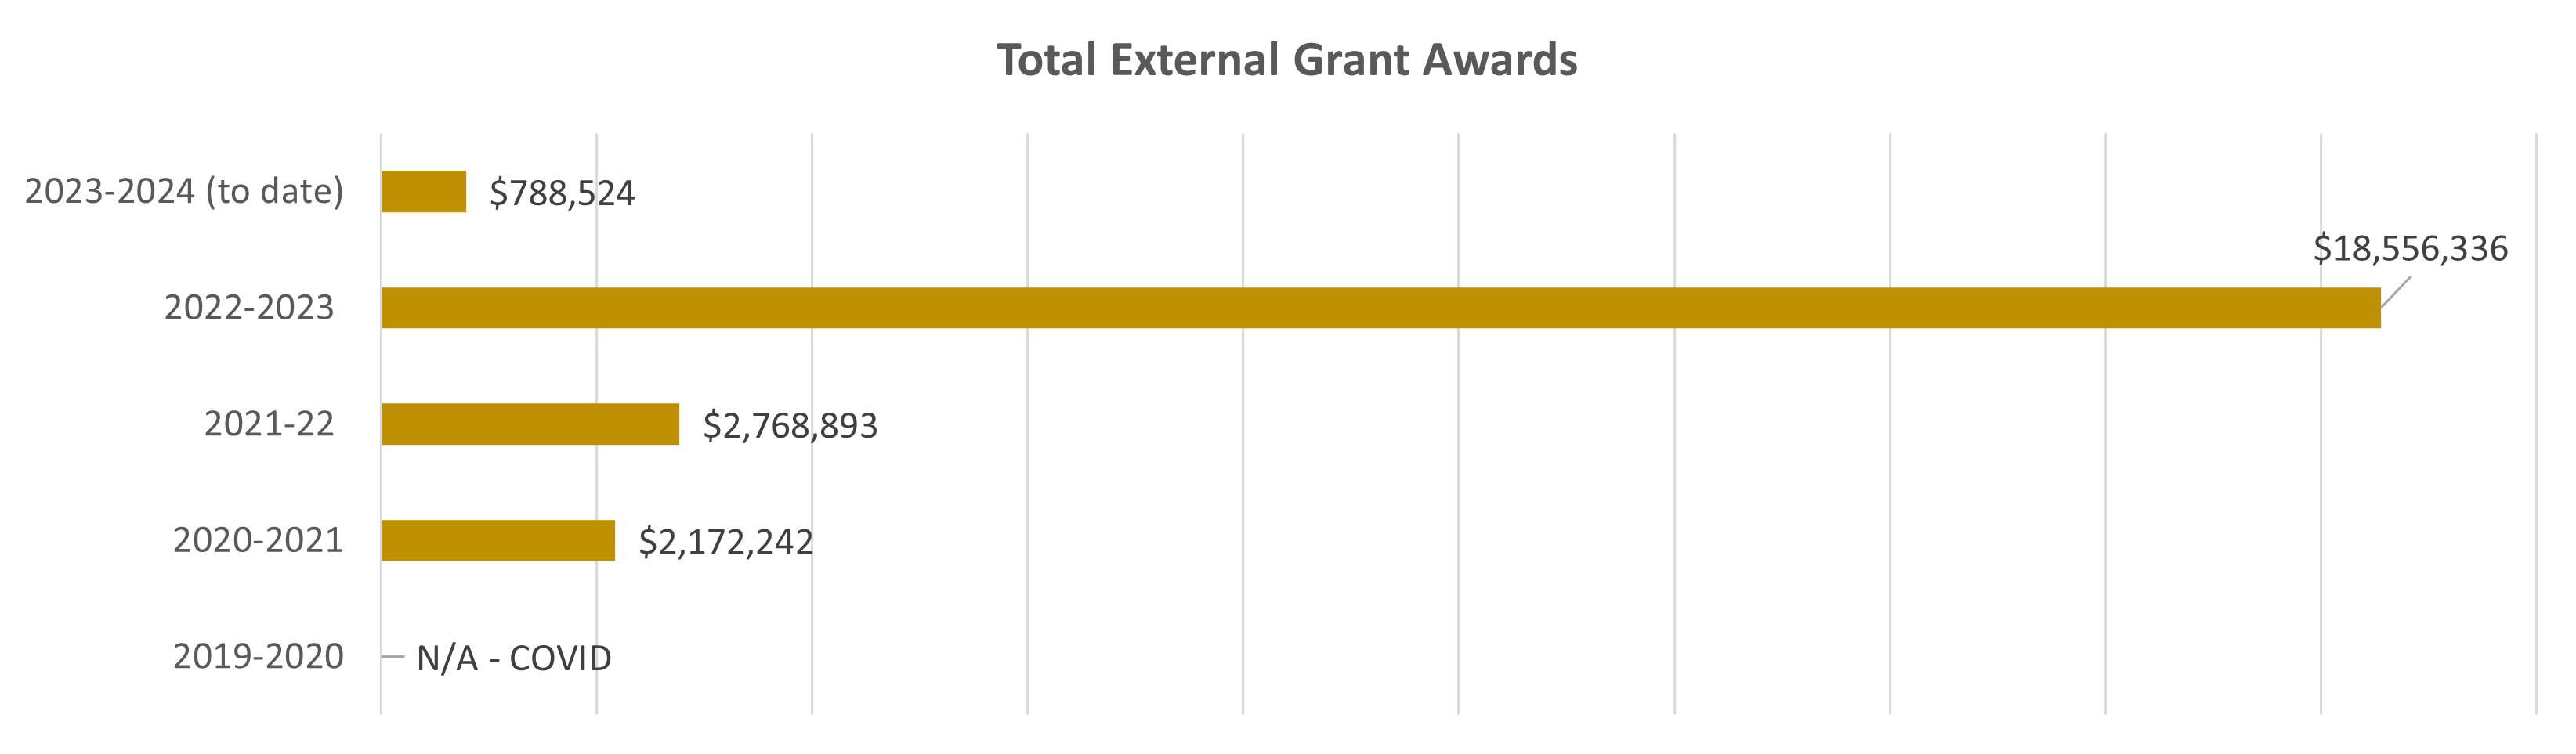 grant-totals-to-date.png